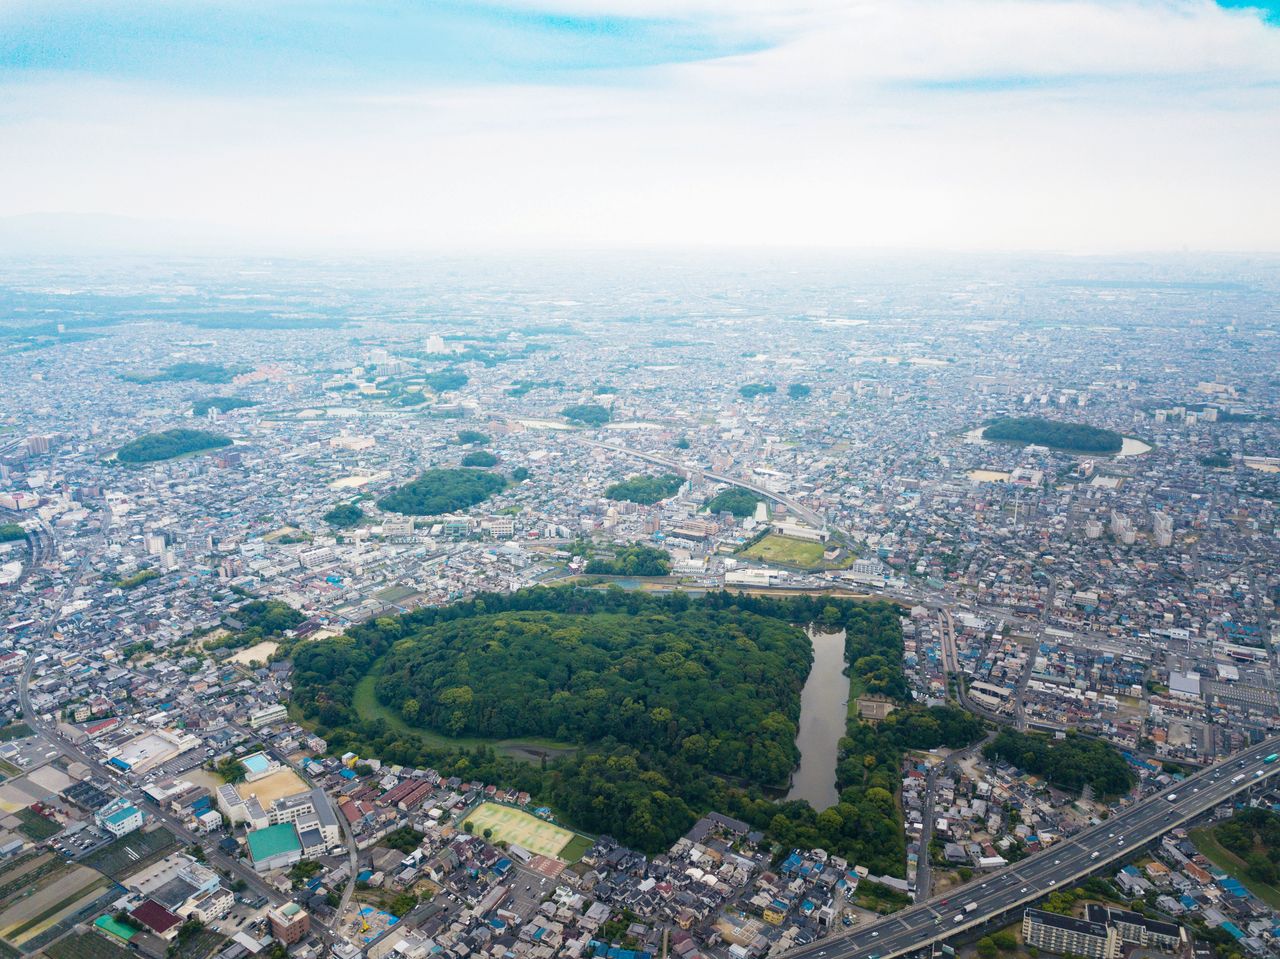 This aerial photo shows the highly built up area surrounding the Furuichi Tumulus cluster. The tomb of of Emperor Ōjin can be seen at the bottom center of the frame.